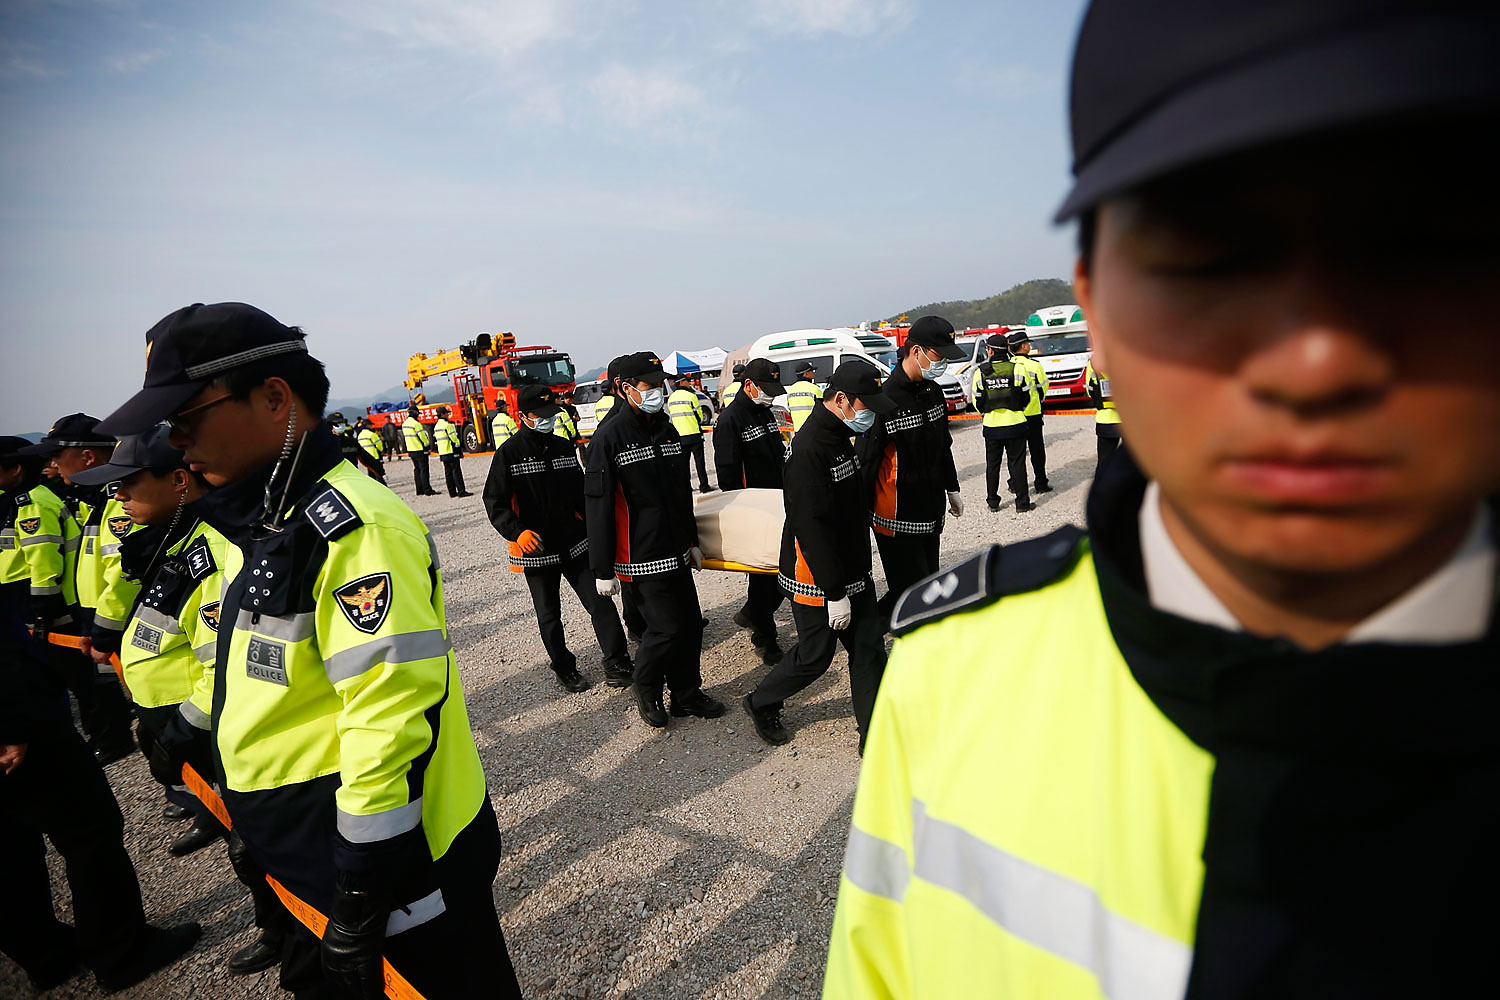 Rescue workers carry the body of passenger who was on the capsized Sewol passenger ship at a port where family members of missing passengers have gathered, in Jindo